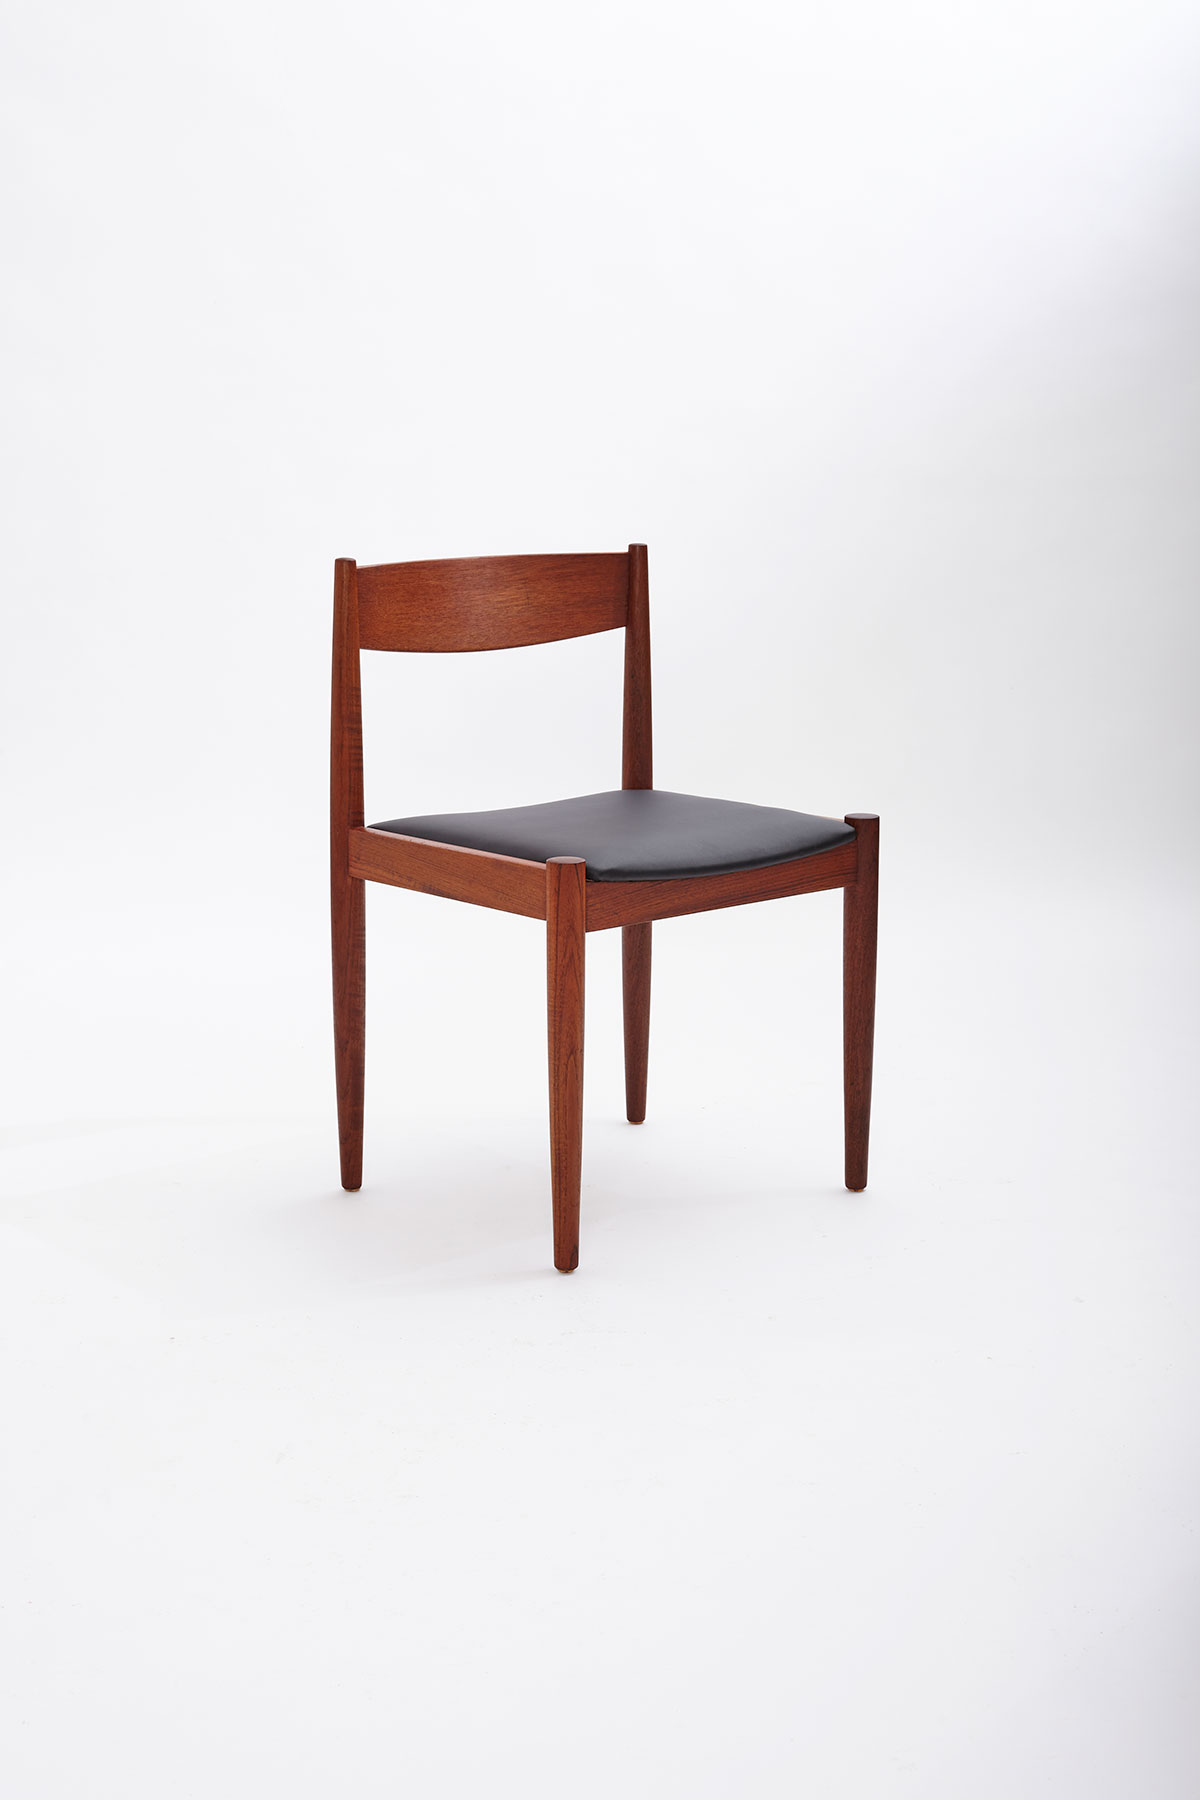 1711627644-yw_danish_teak_chairs_set_of-_8_right_front_angle.jpg